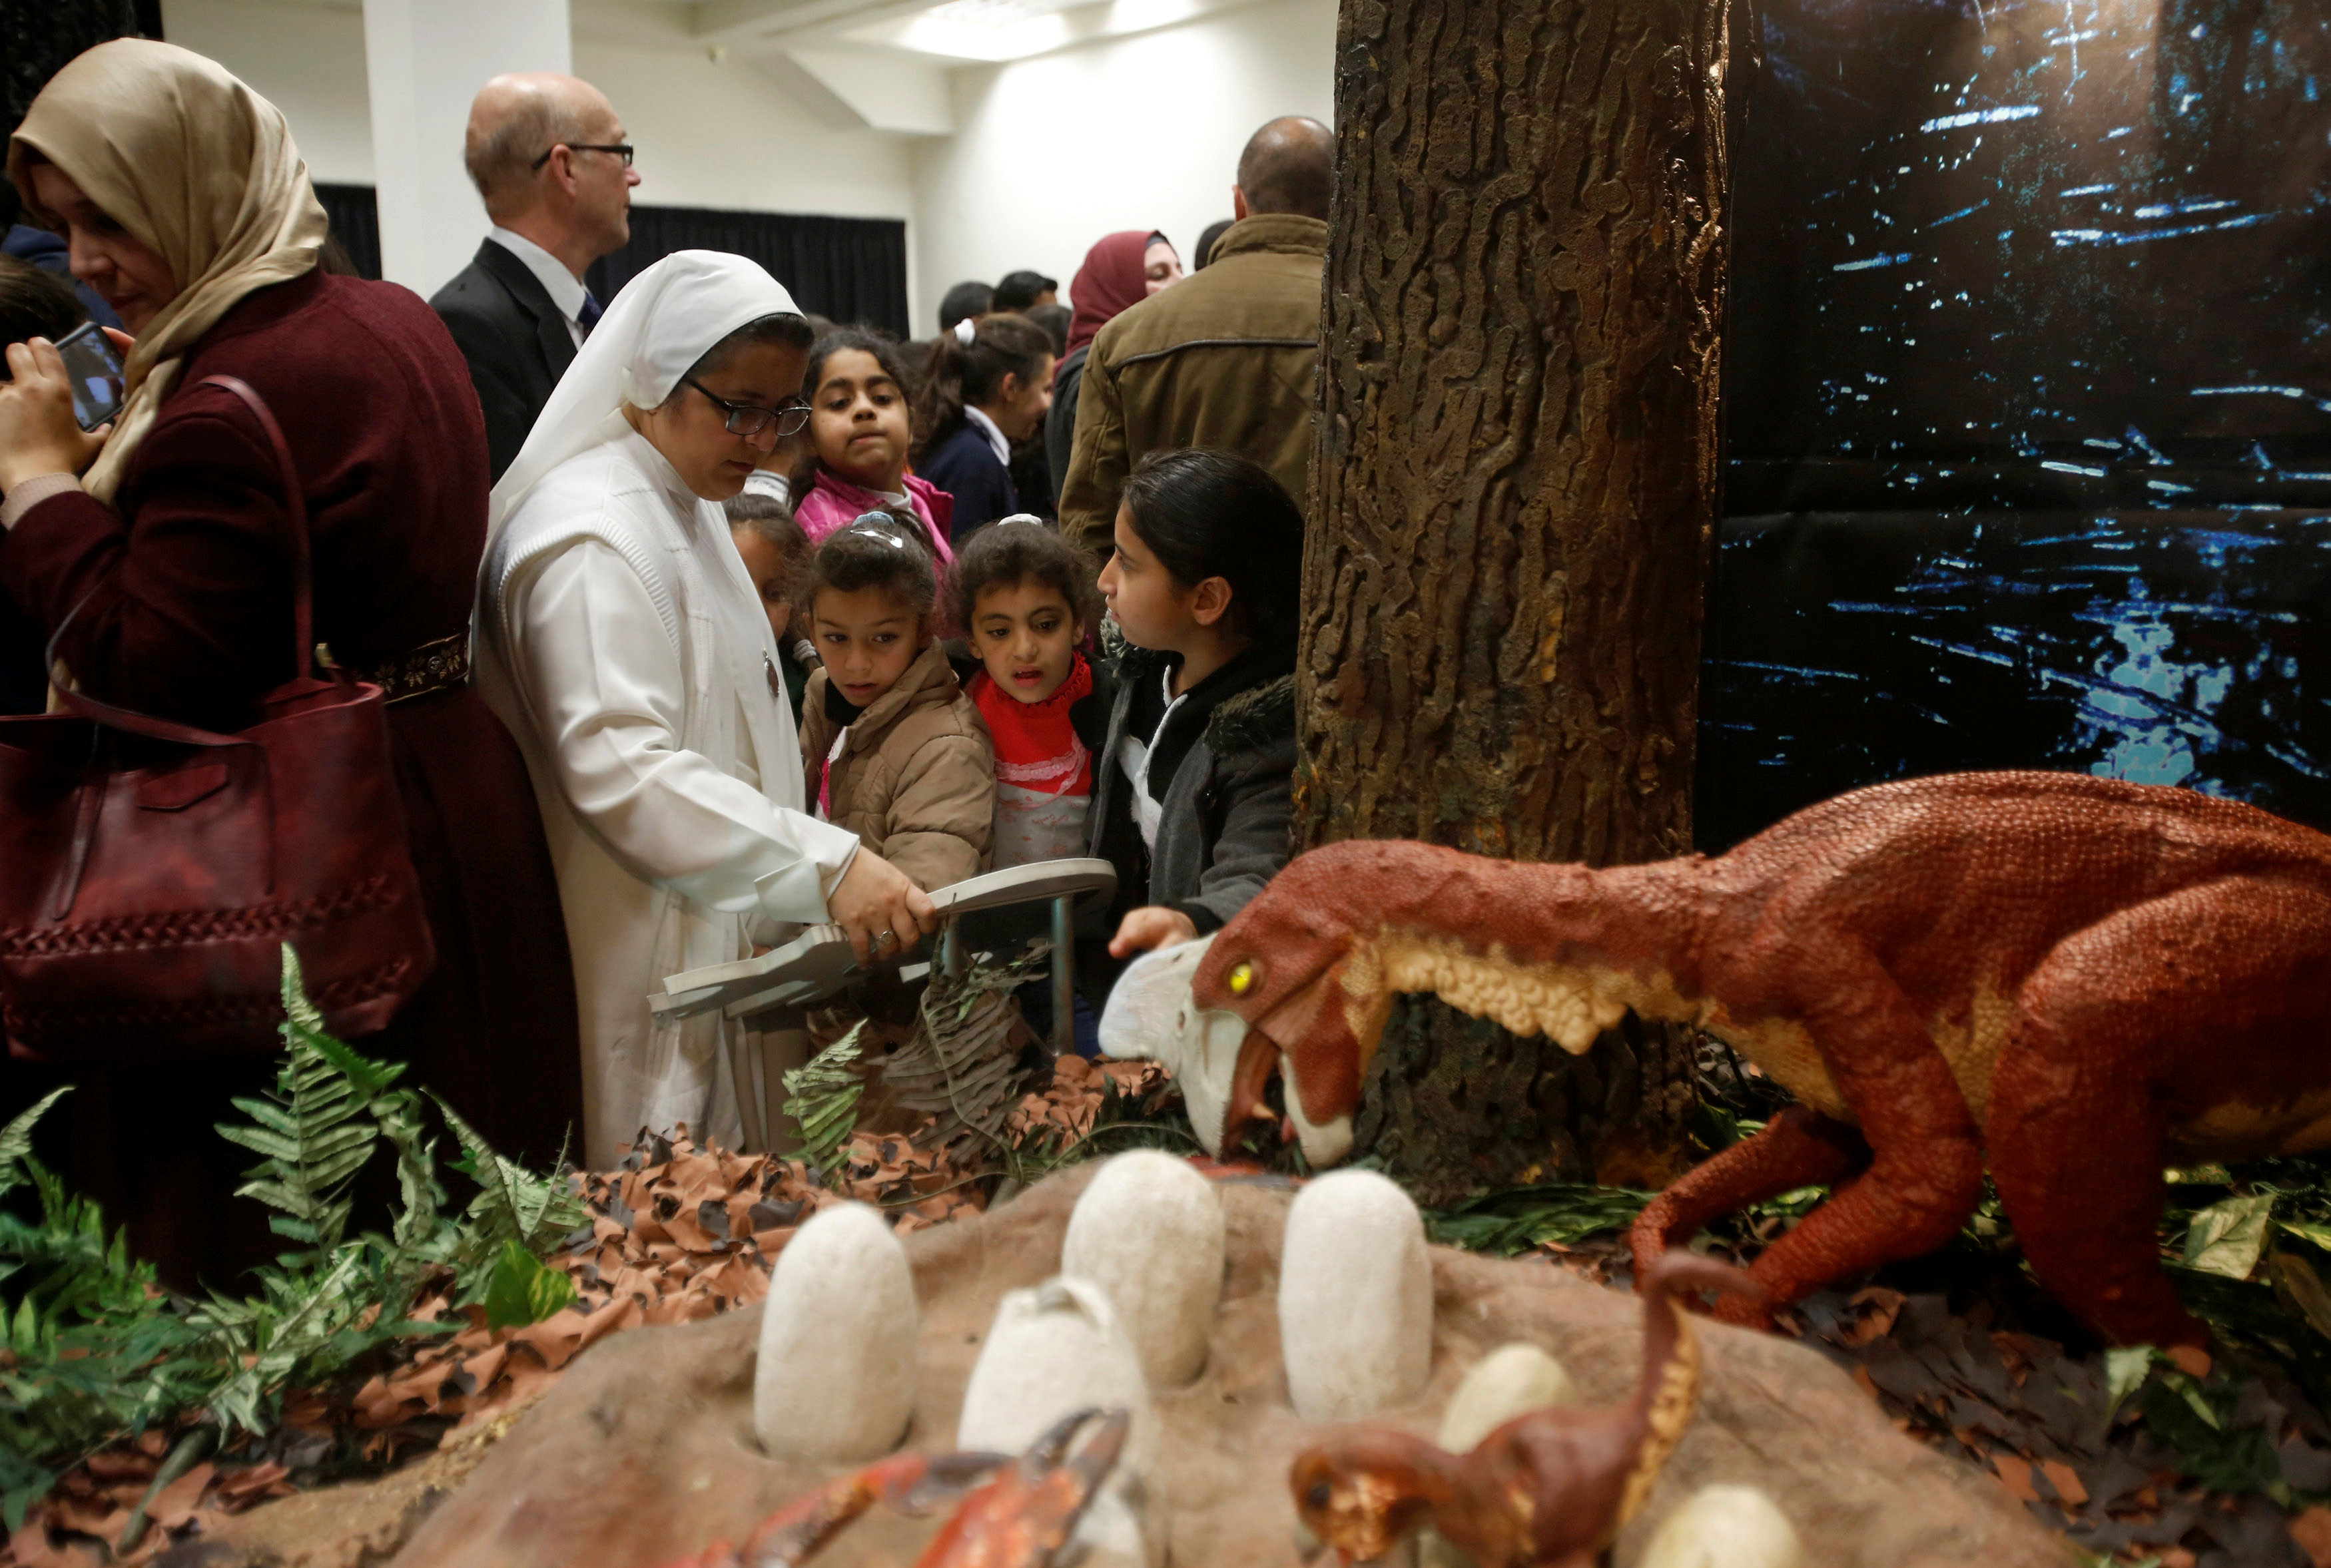 Palestinian children and visitors look at models of dinosaurs, which were donated by Henry Lowe to Bethlehem-Bath Links, during the opening of a dinosaur exhibition arranged by a Bath charity in the West Bank city of Bethlehem